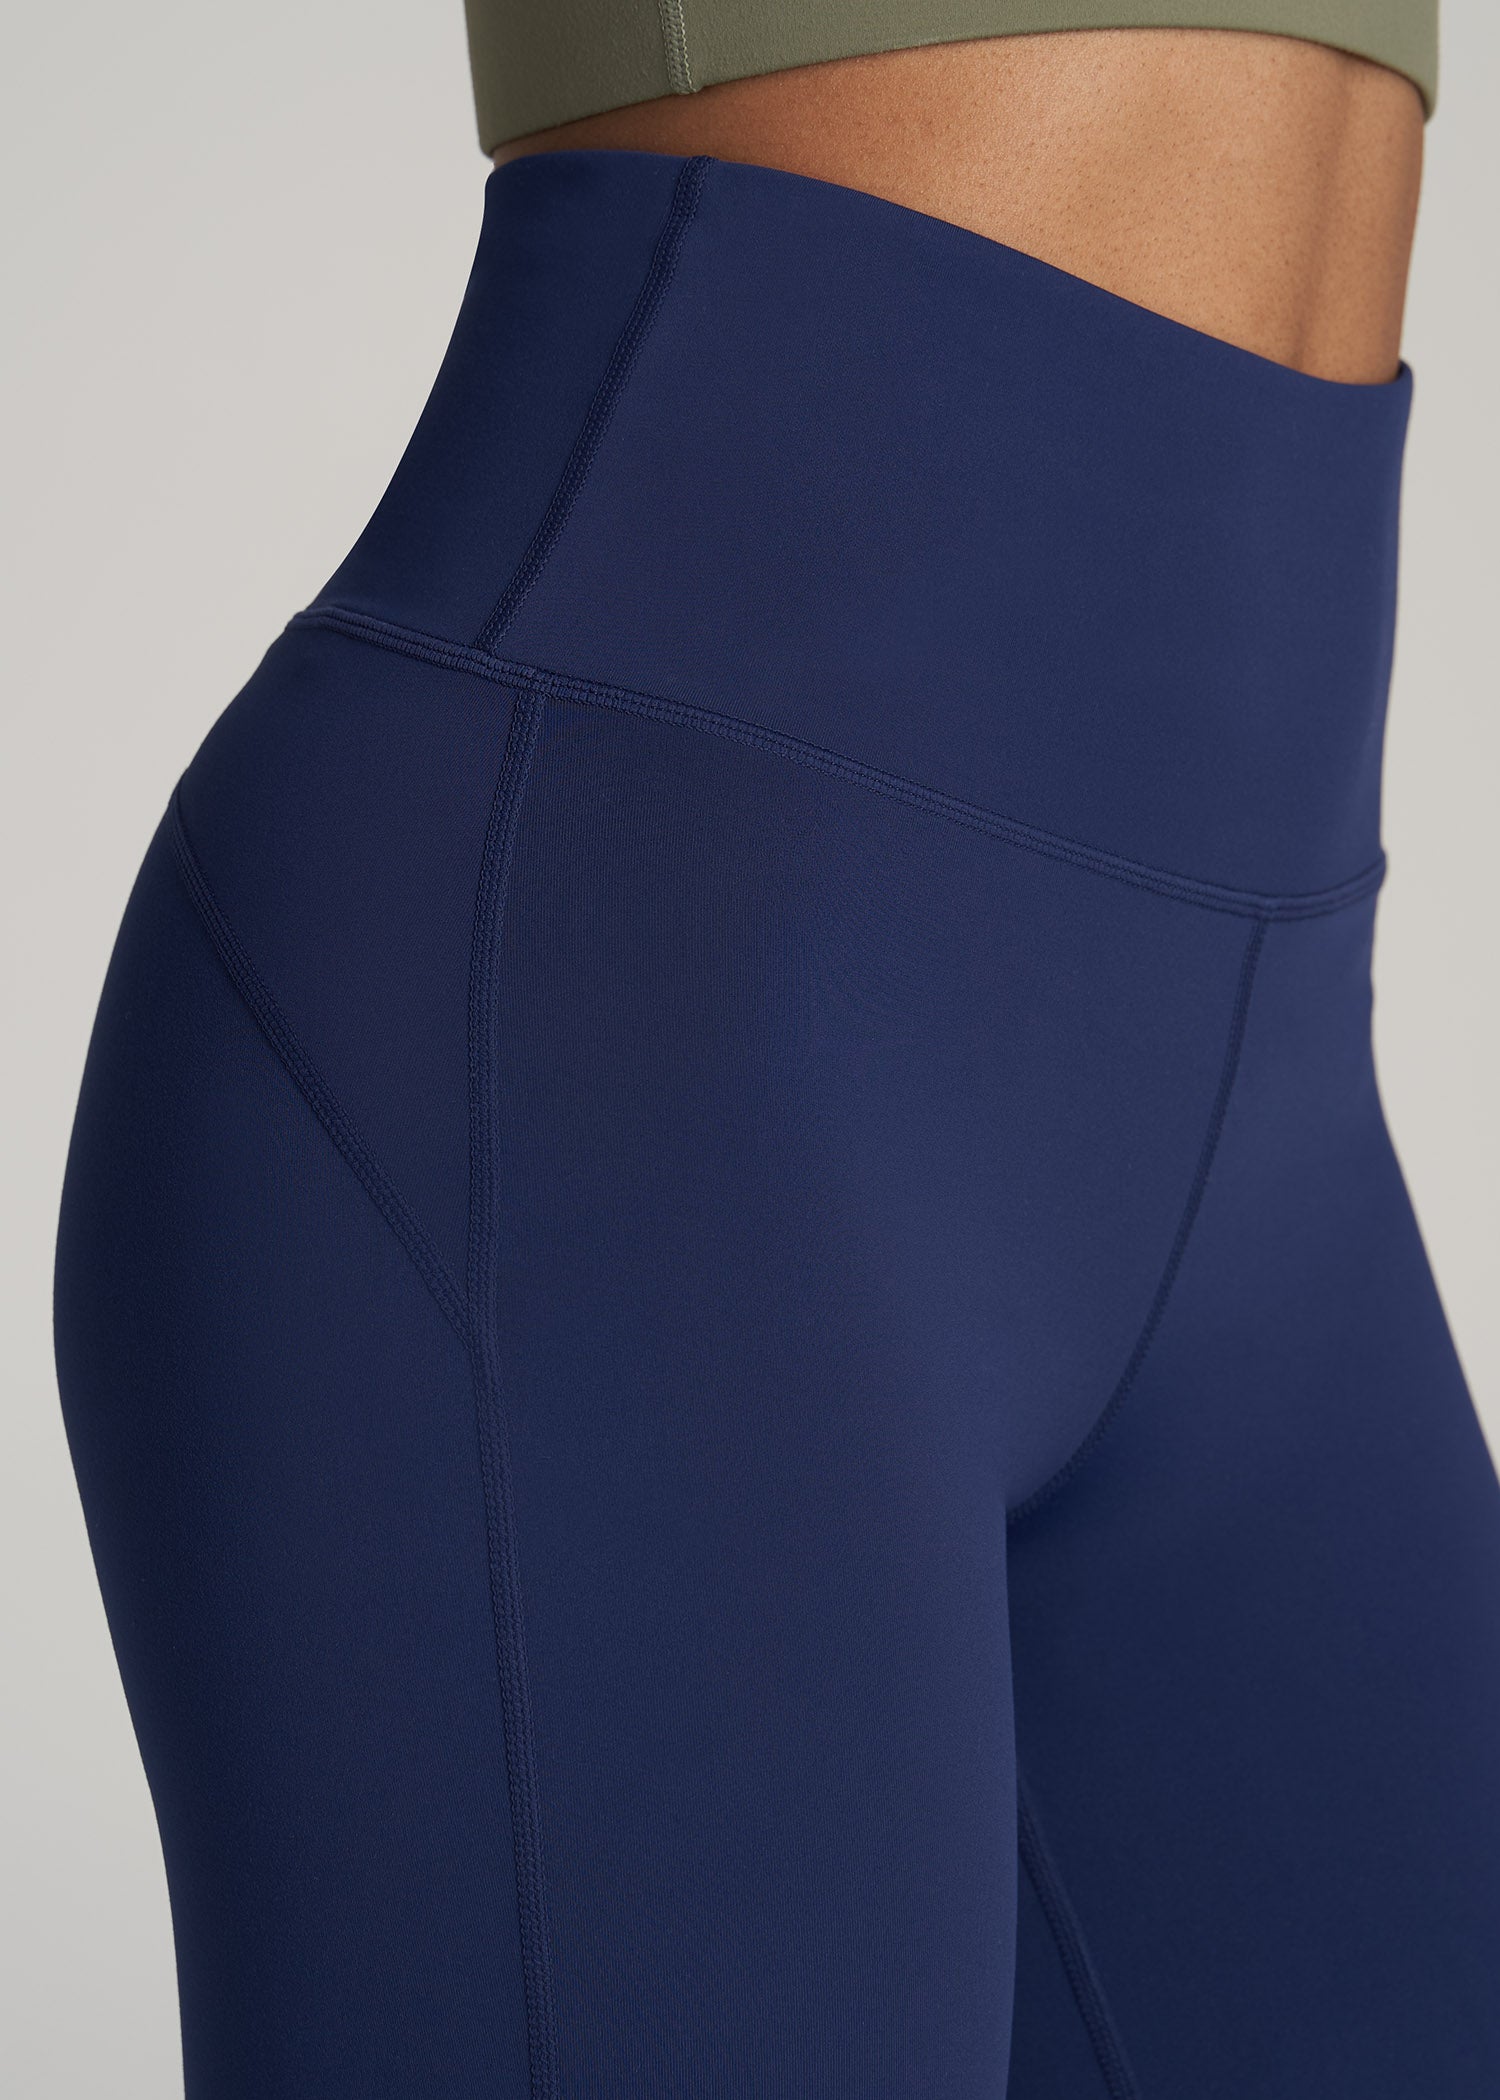 Took a chance on Align joggers in true navy (10): I never knew